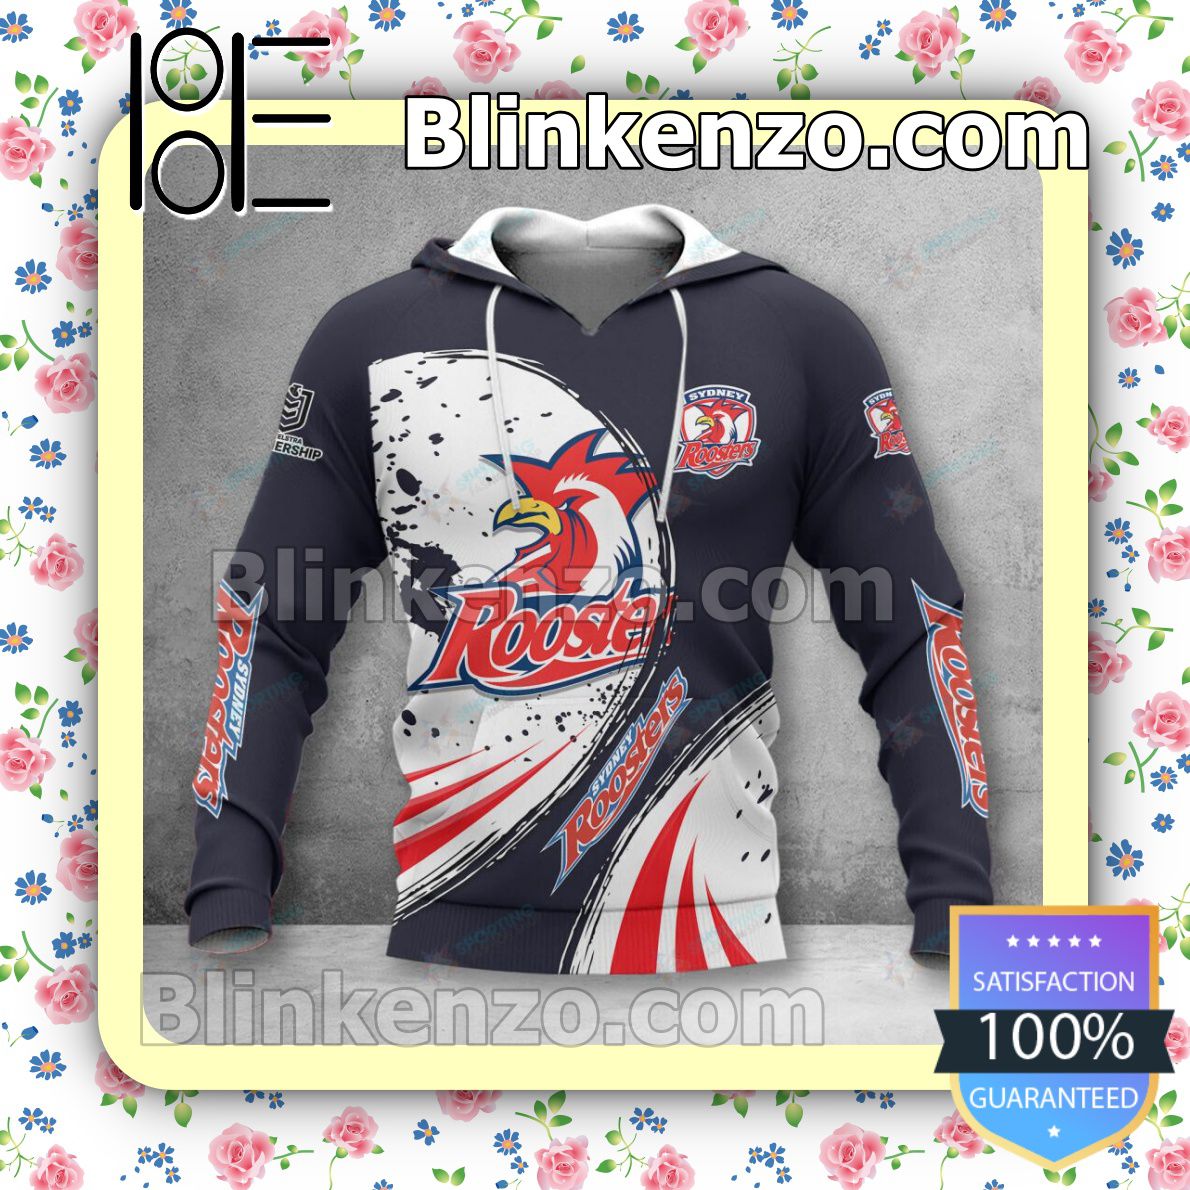 Sydney Roosters T-shirt, Christmas Sweater